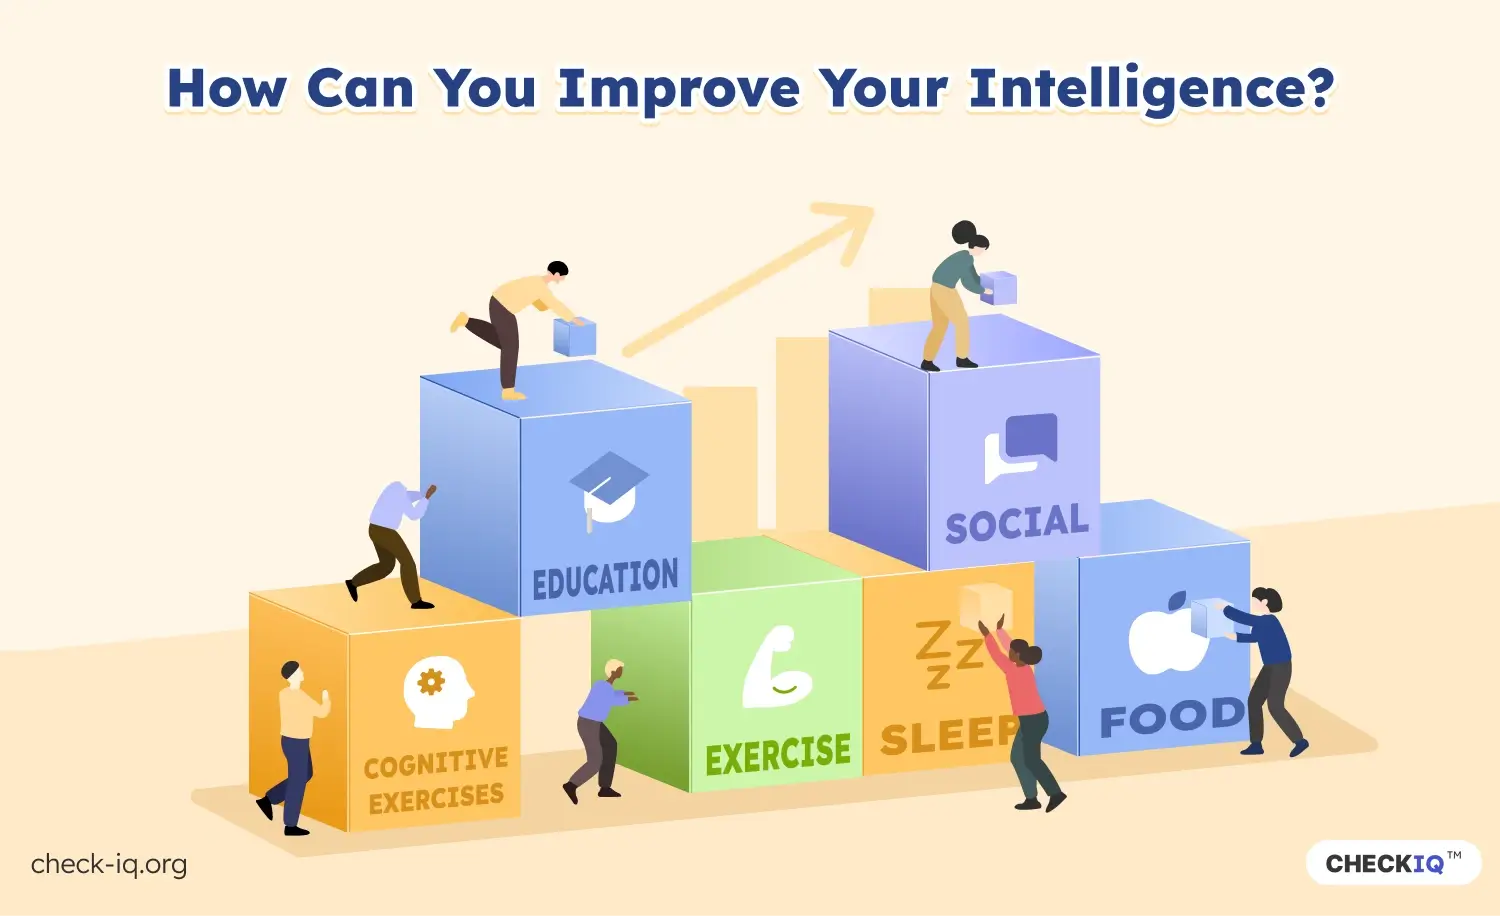 People building blocks labeled education, social, cognitive exercises, exercise, sleep, and food to improve intelligence